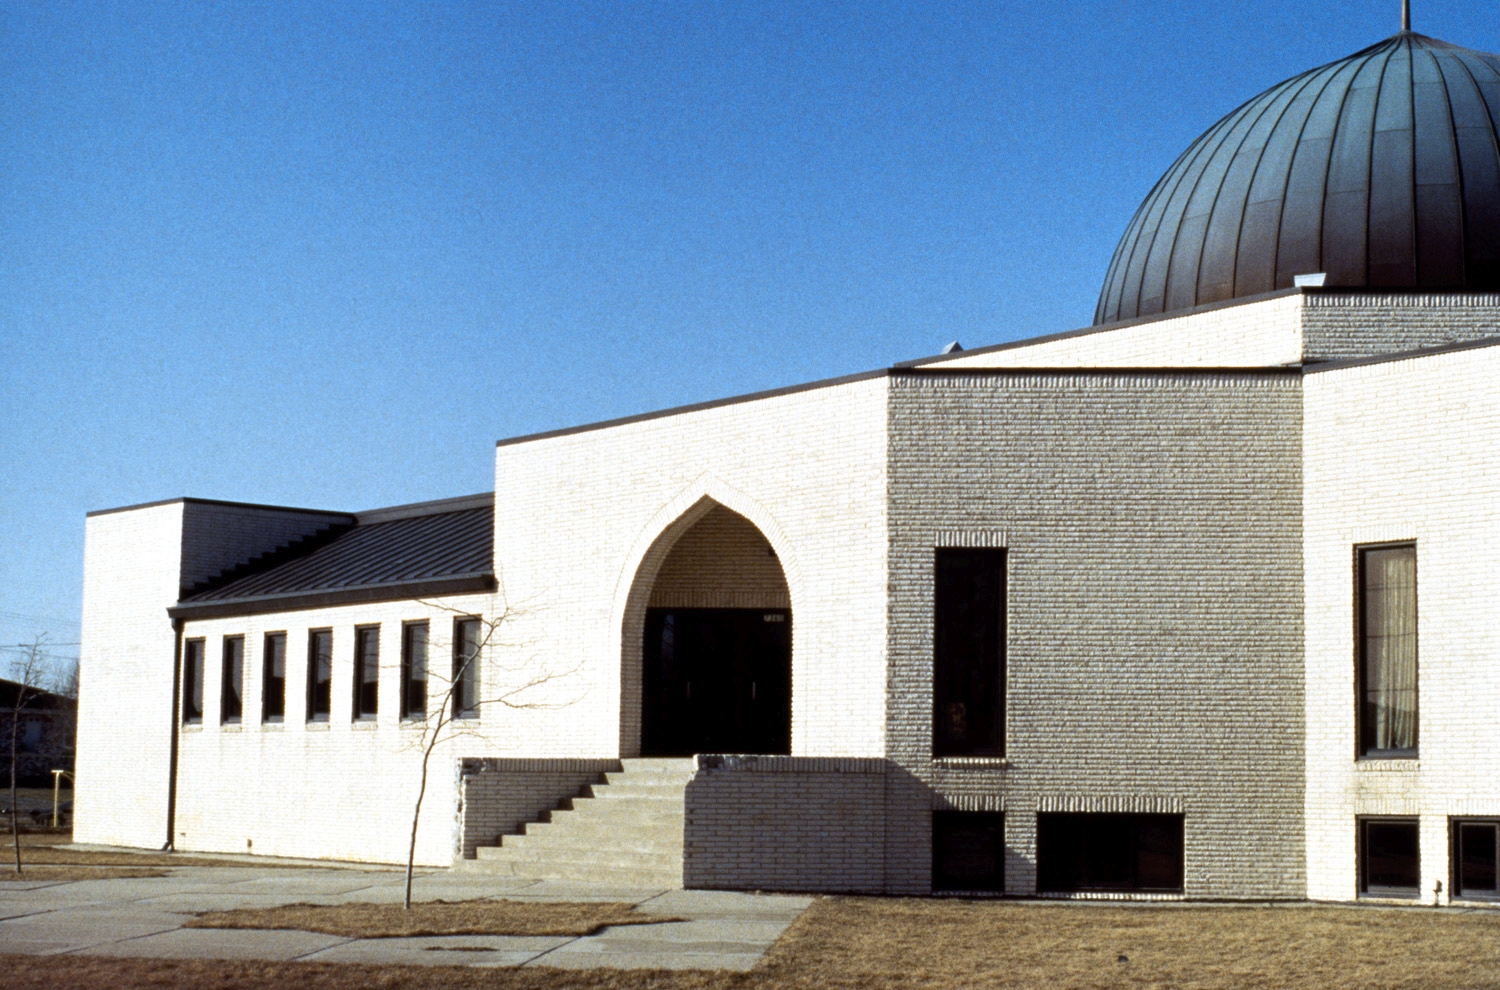 View of south facade, with entrance and partial view of dome; mosque prior to expansion